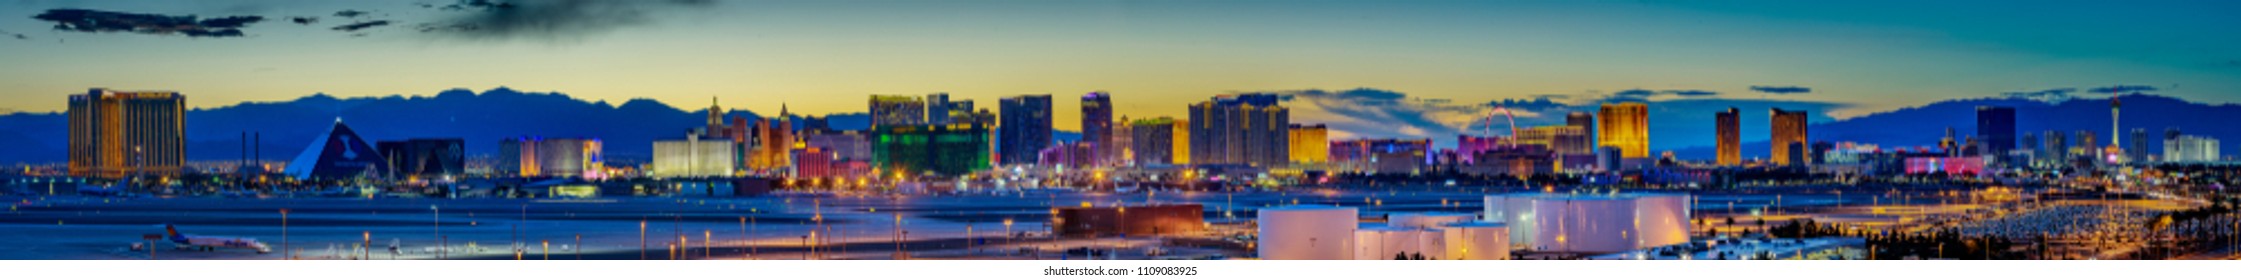 Las Vegas, Nevada - May 28, 2018 : Skyline view at sunset of the famous Las Vegas Strip located in world class hotels and casinos, NV